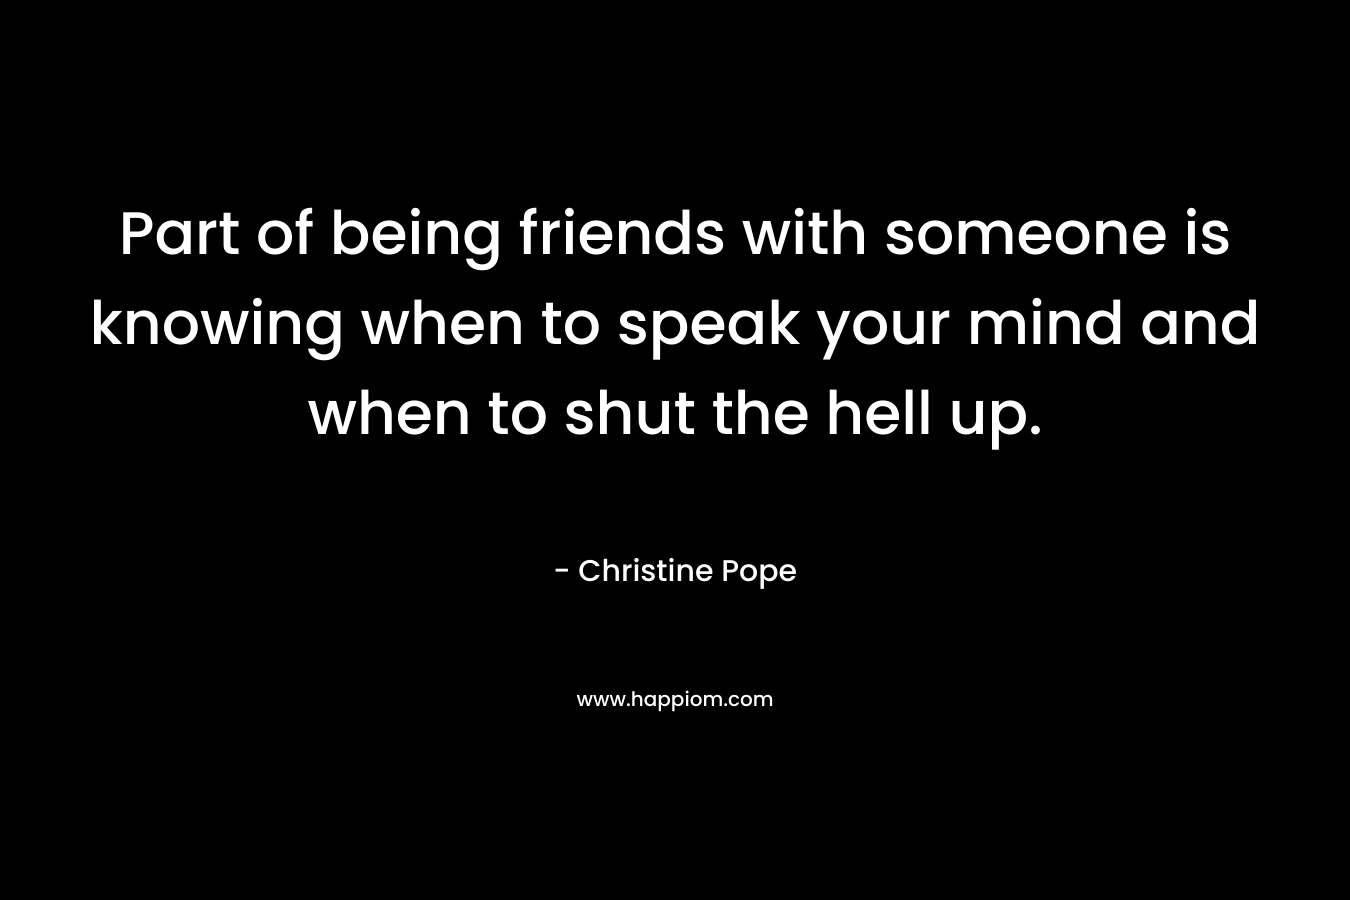 Part of being friends with someone is knowing when to speak your mind and when to shut the hell up.